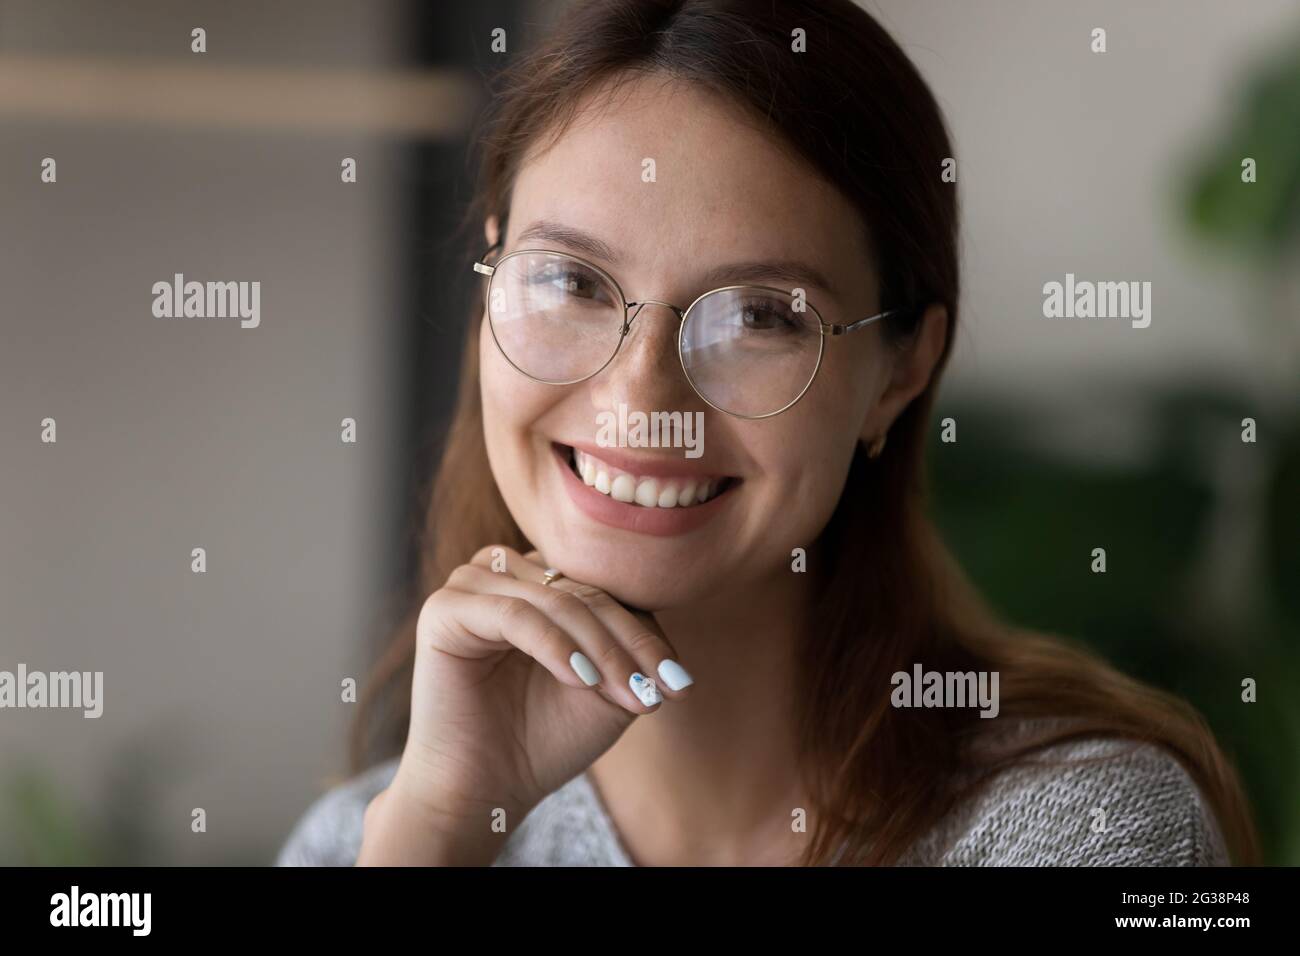 Young attractive woman wearing glasses Stock Photo by ©AVFC 90806098